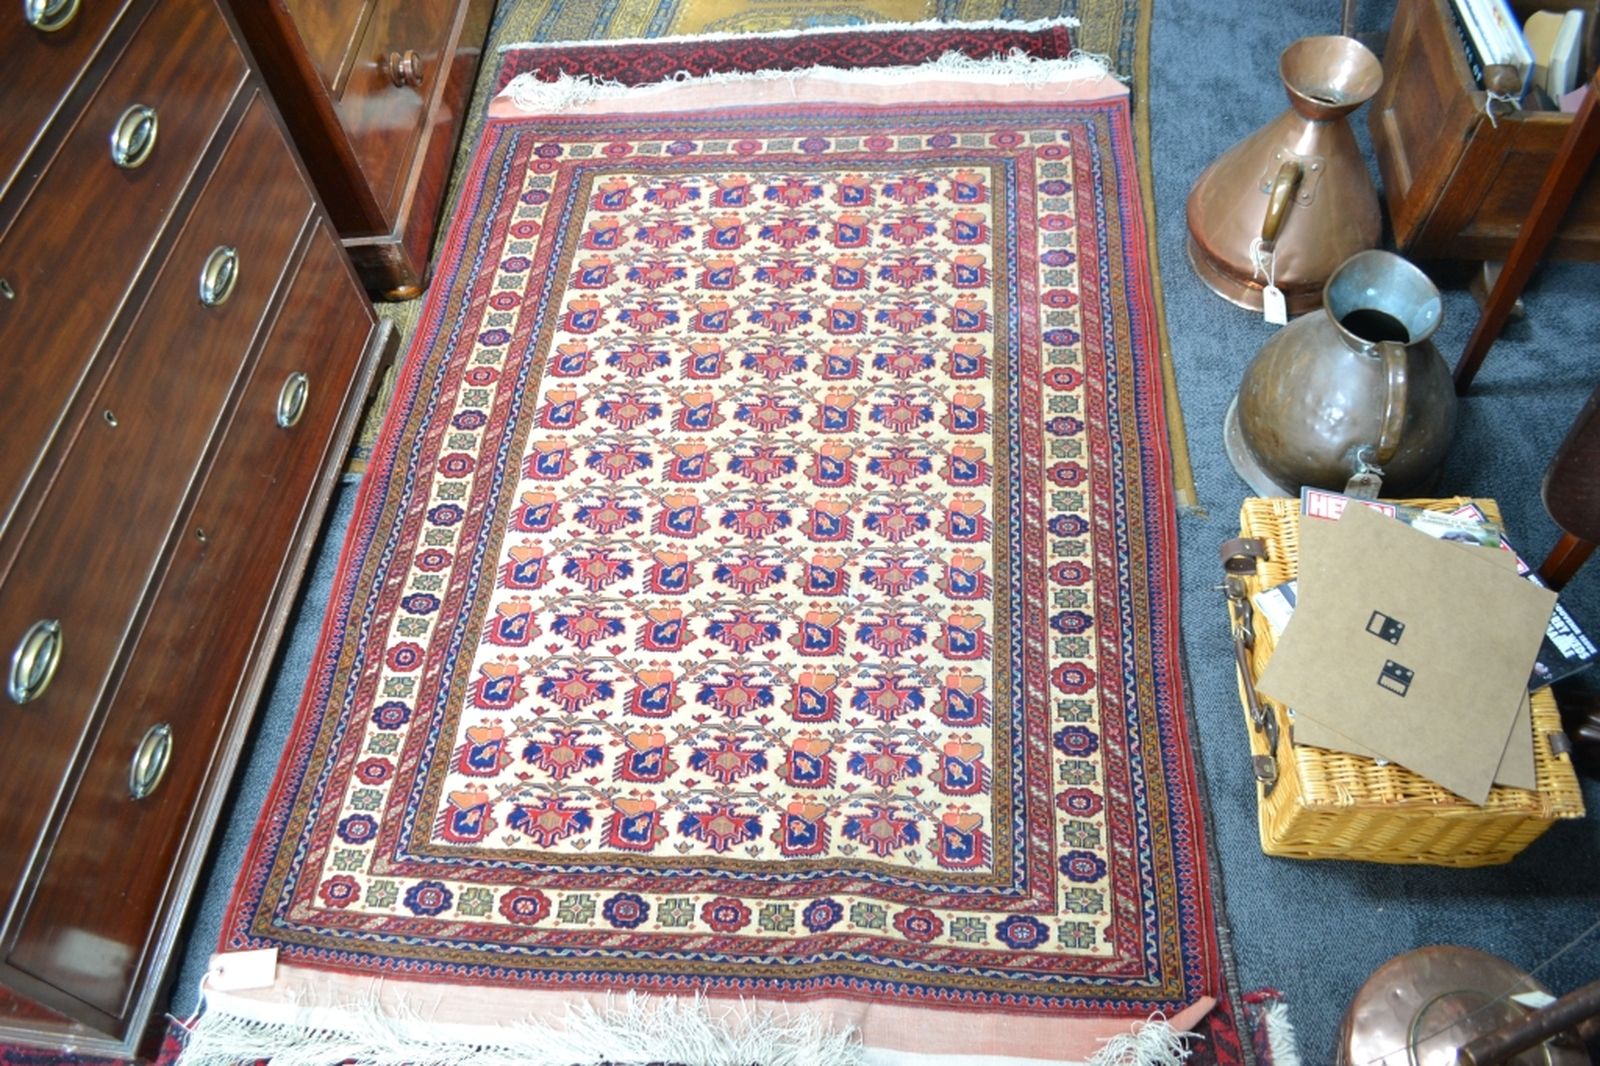 Turkish fringed carpet cream ground with designs in red and blue.